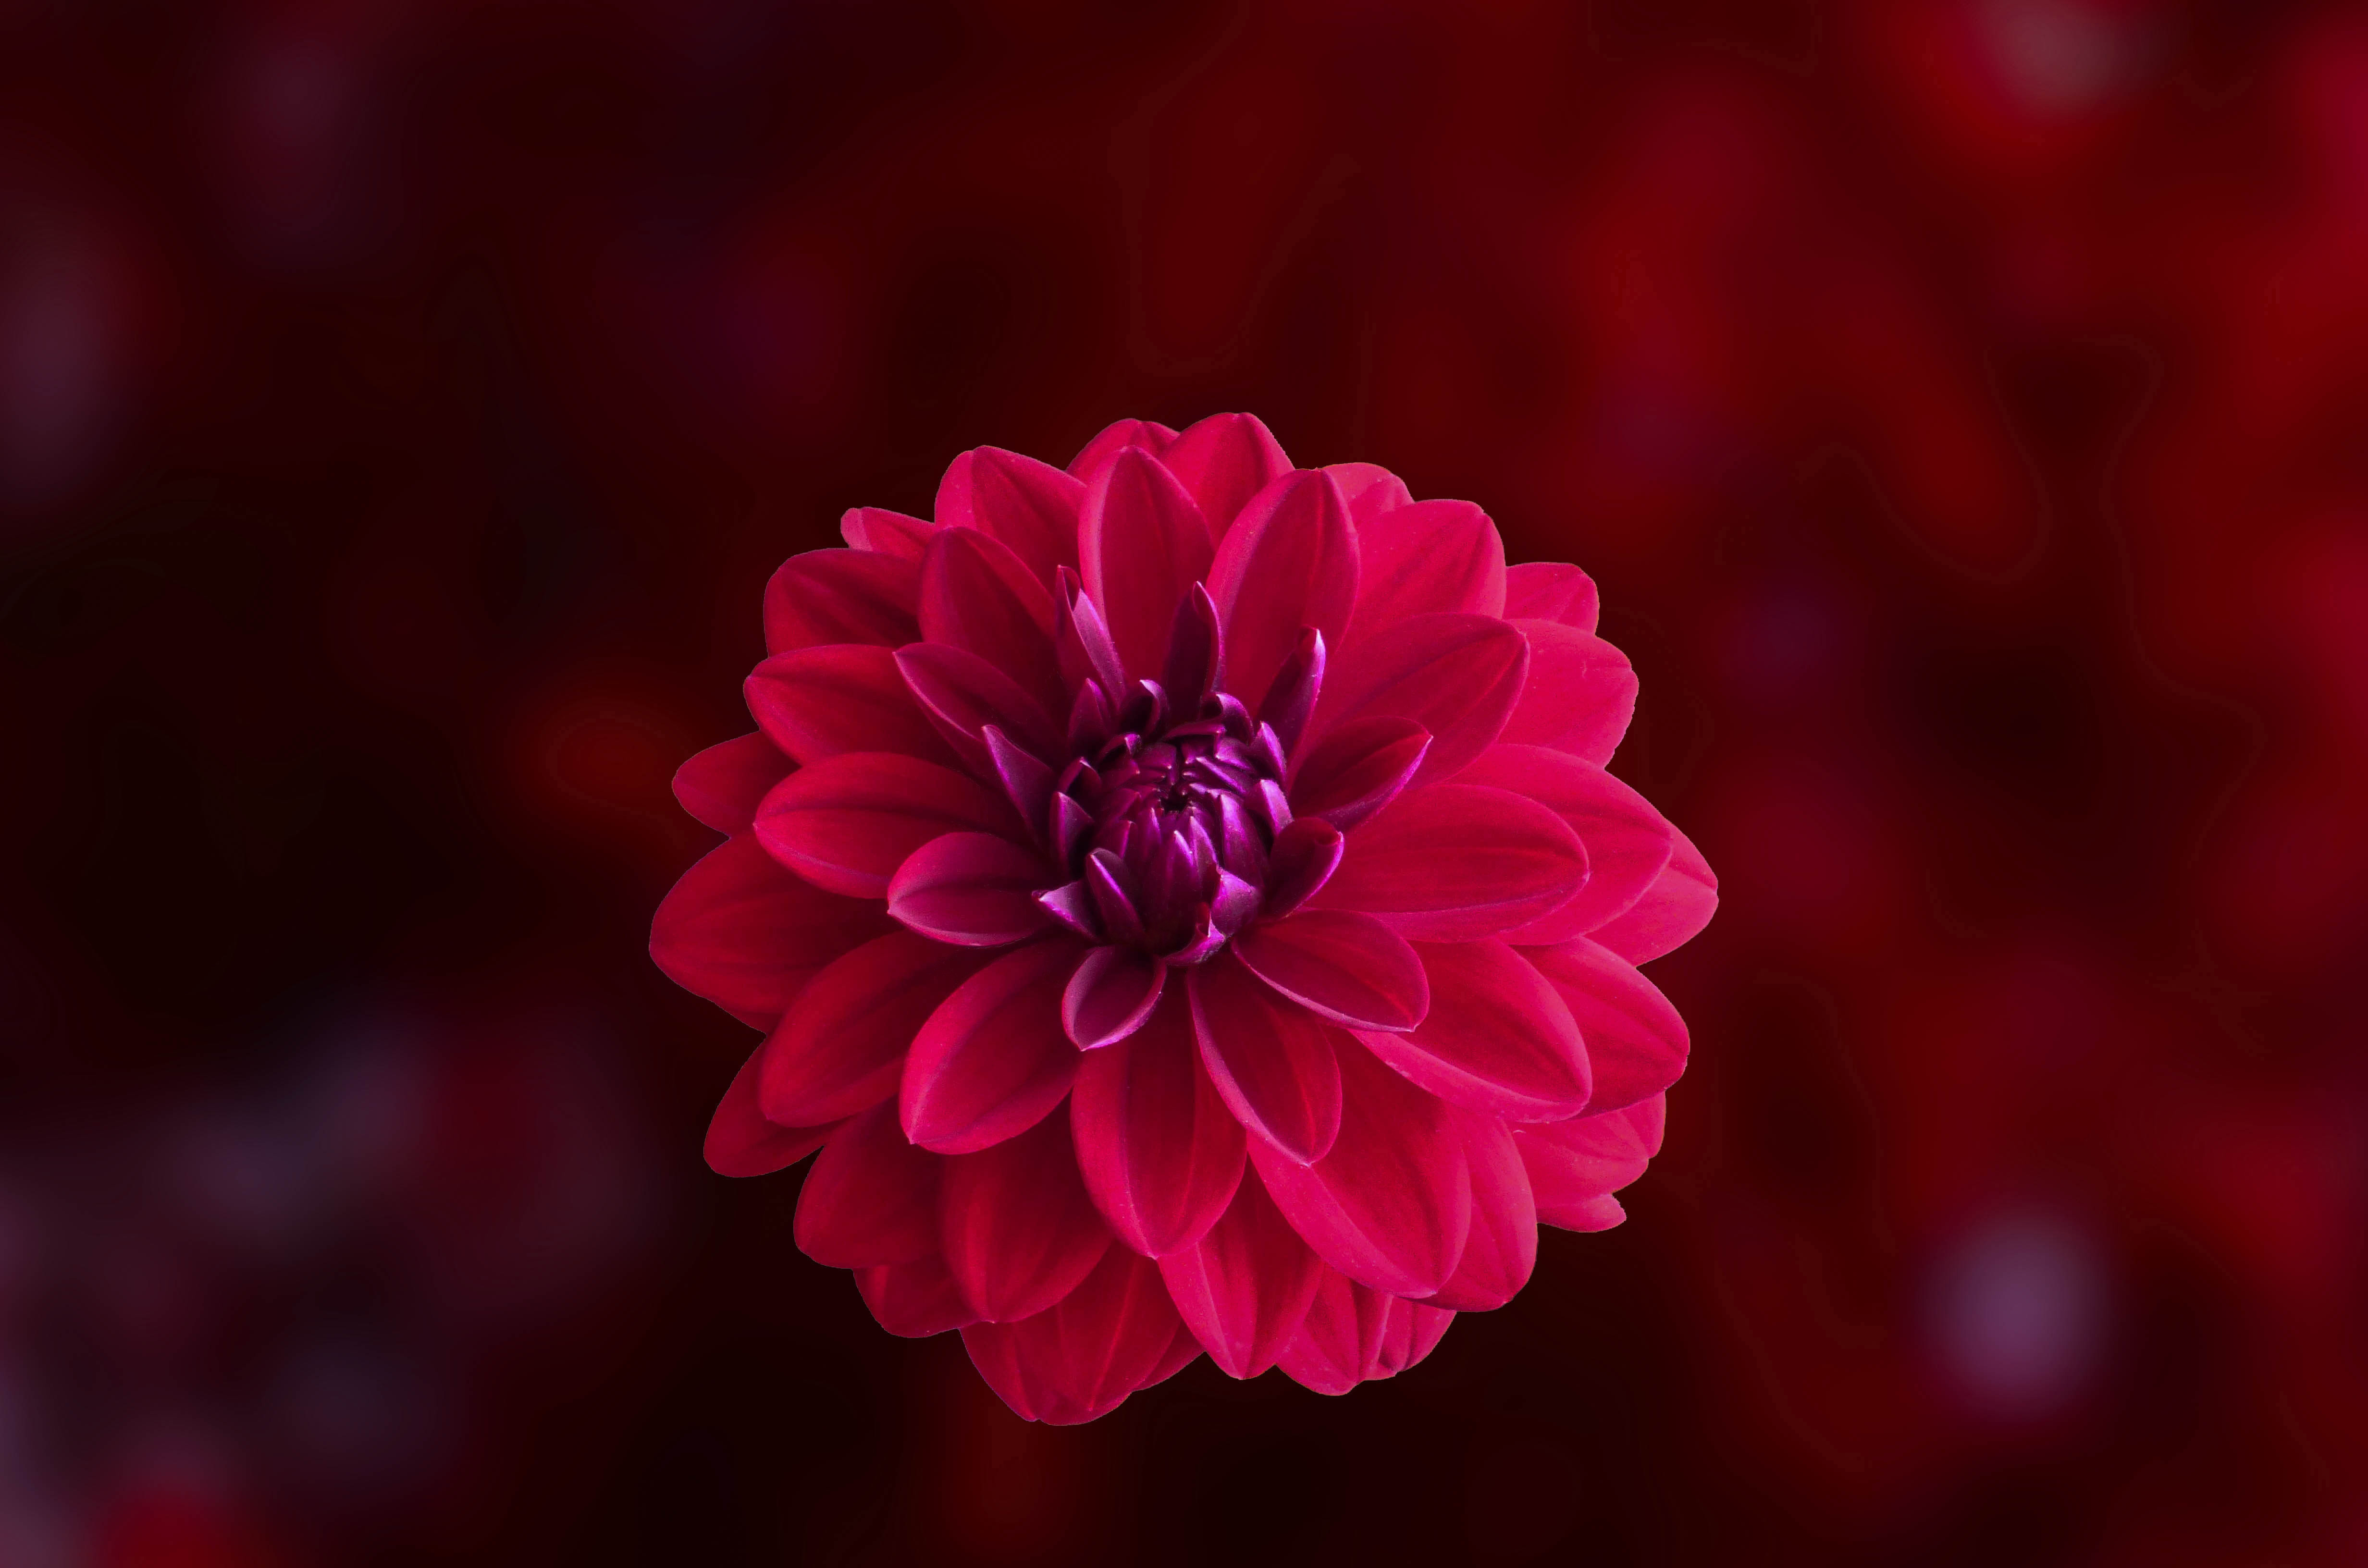 Wallpapers dahlia red pink on the desktop